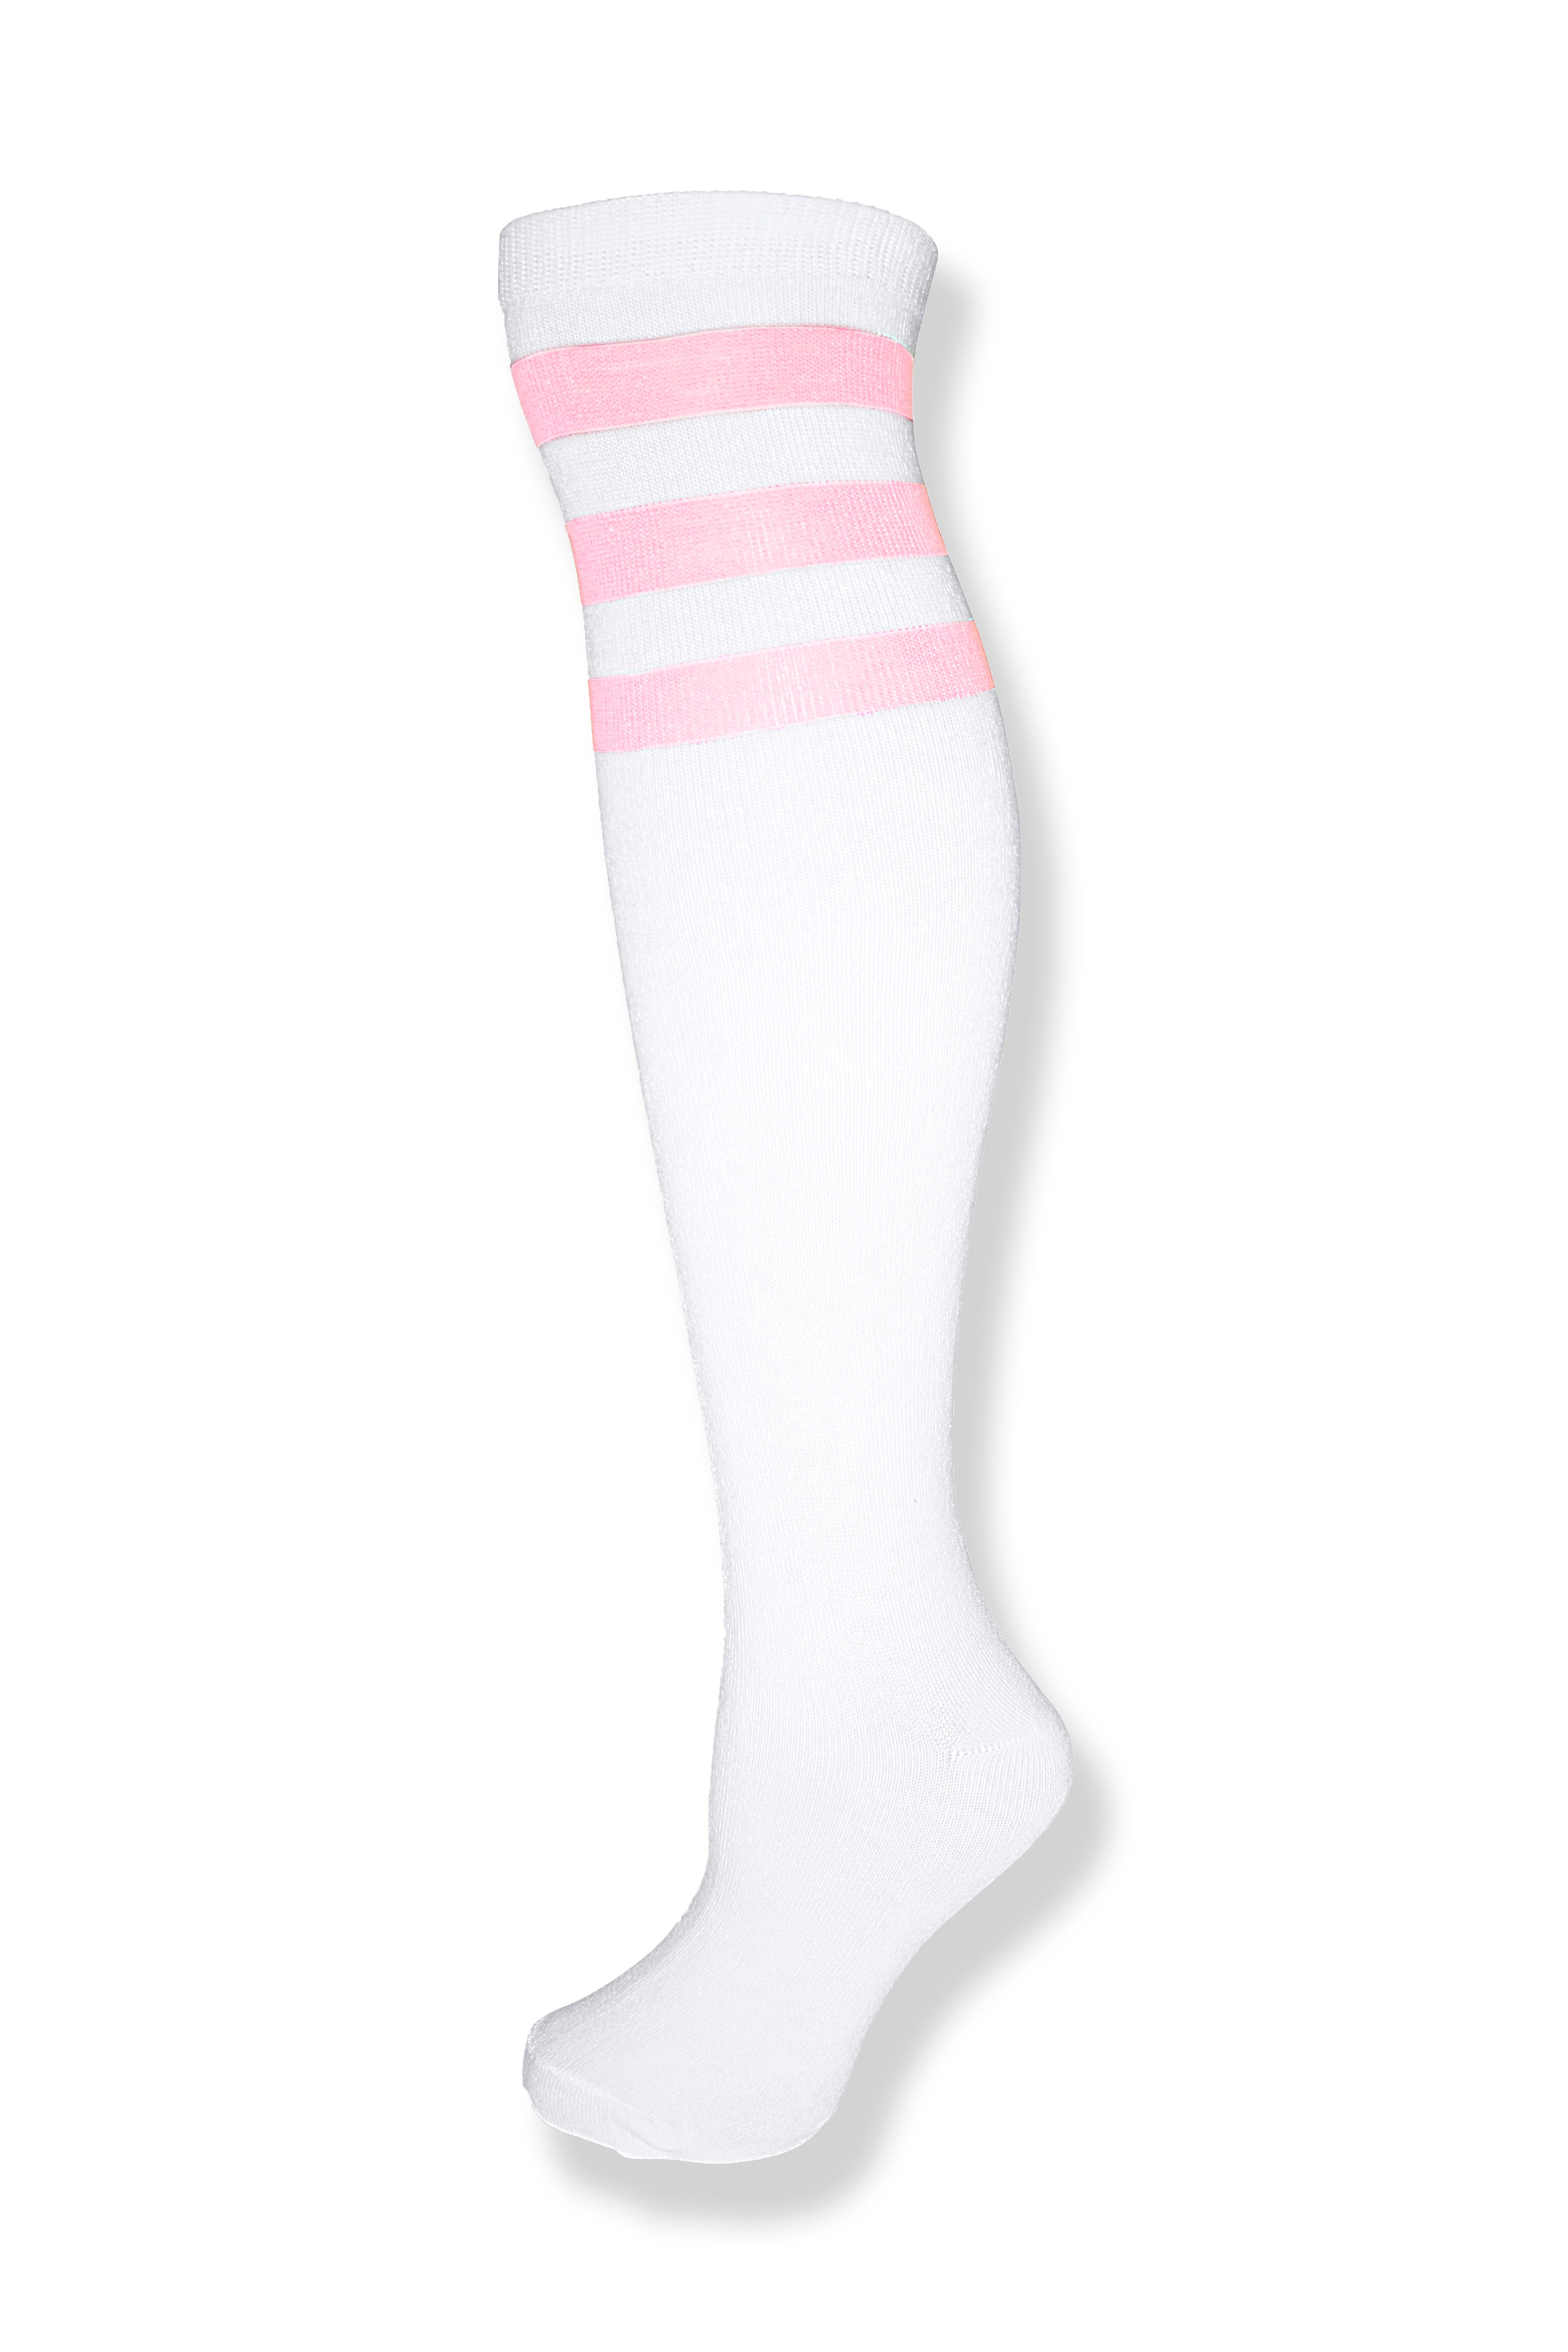 White with Light Pink Stripes Knee High Sock